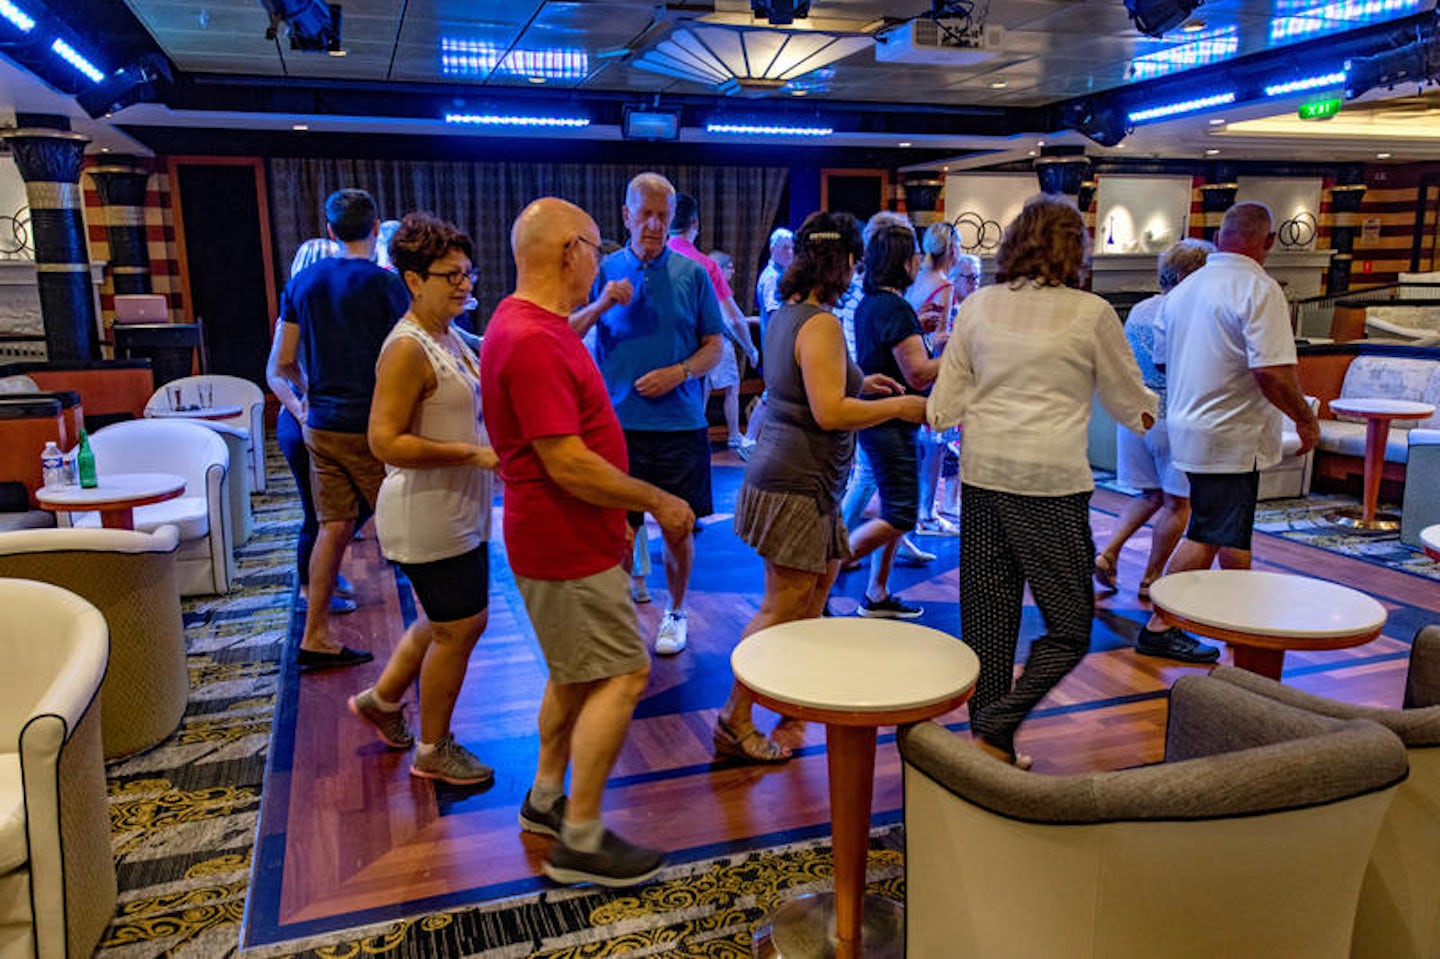 Cha Cha Cha Dance Lessons on Independence of the Seas